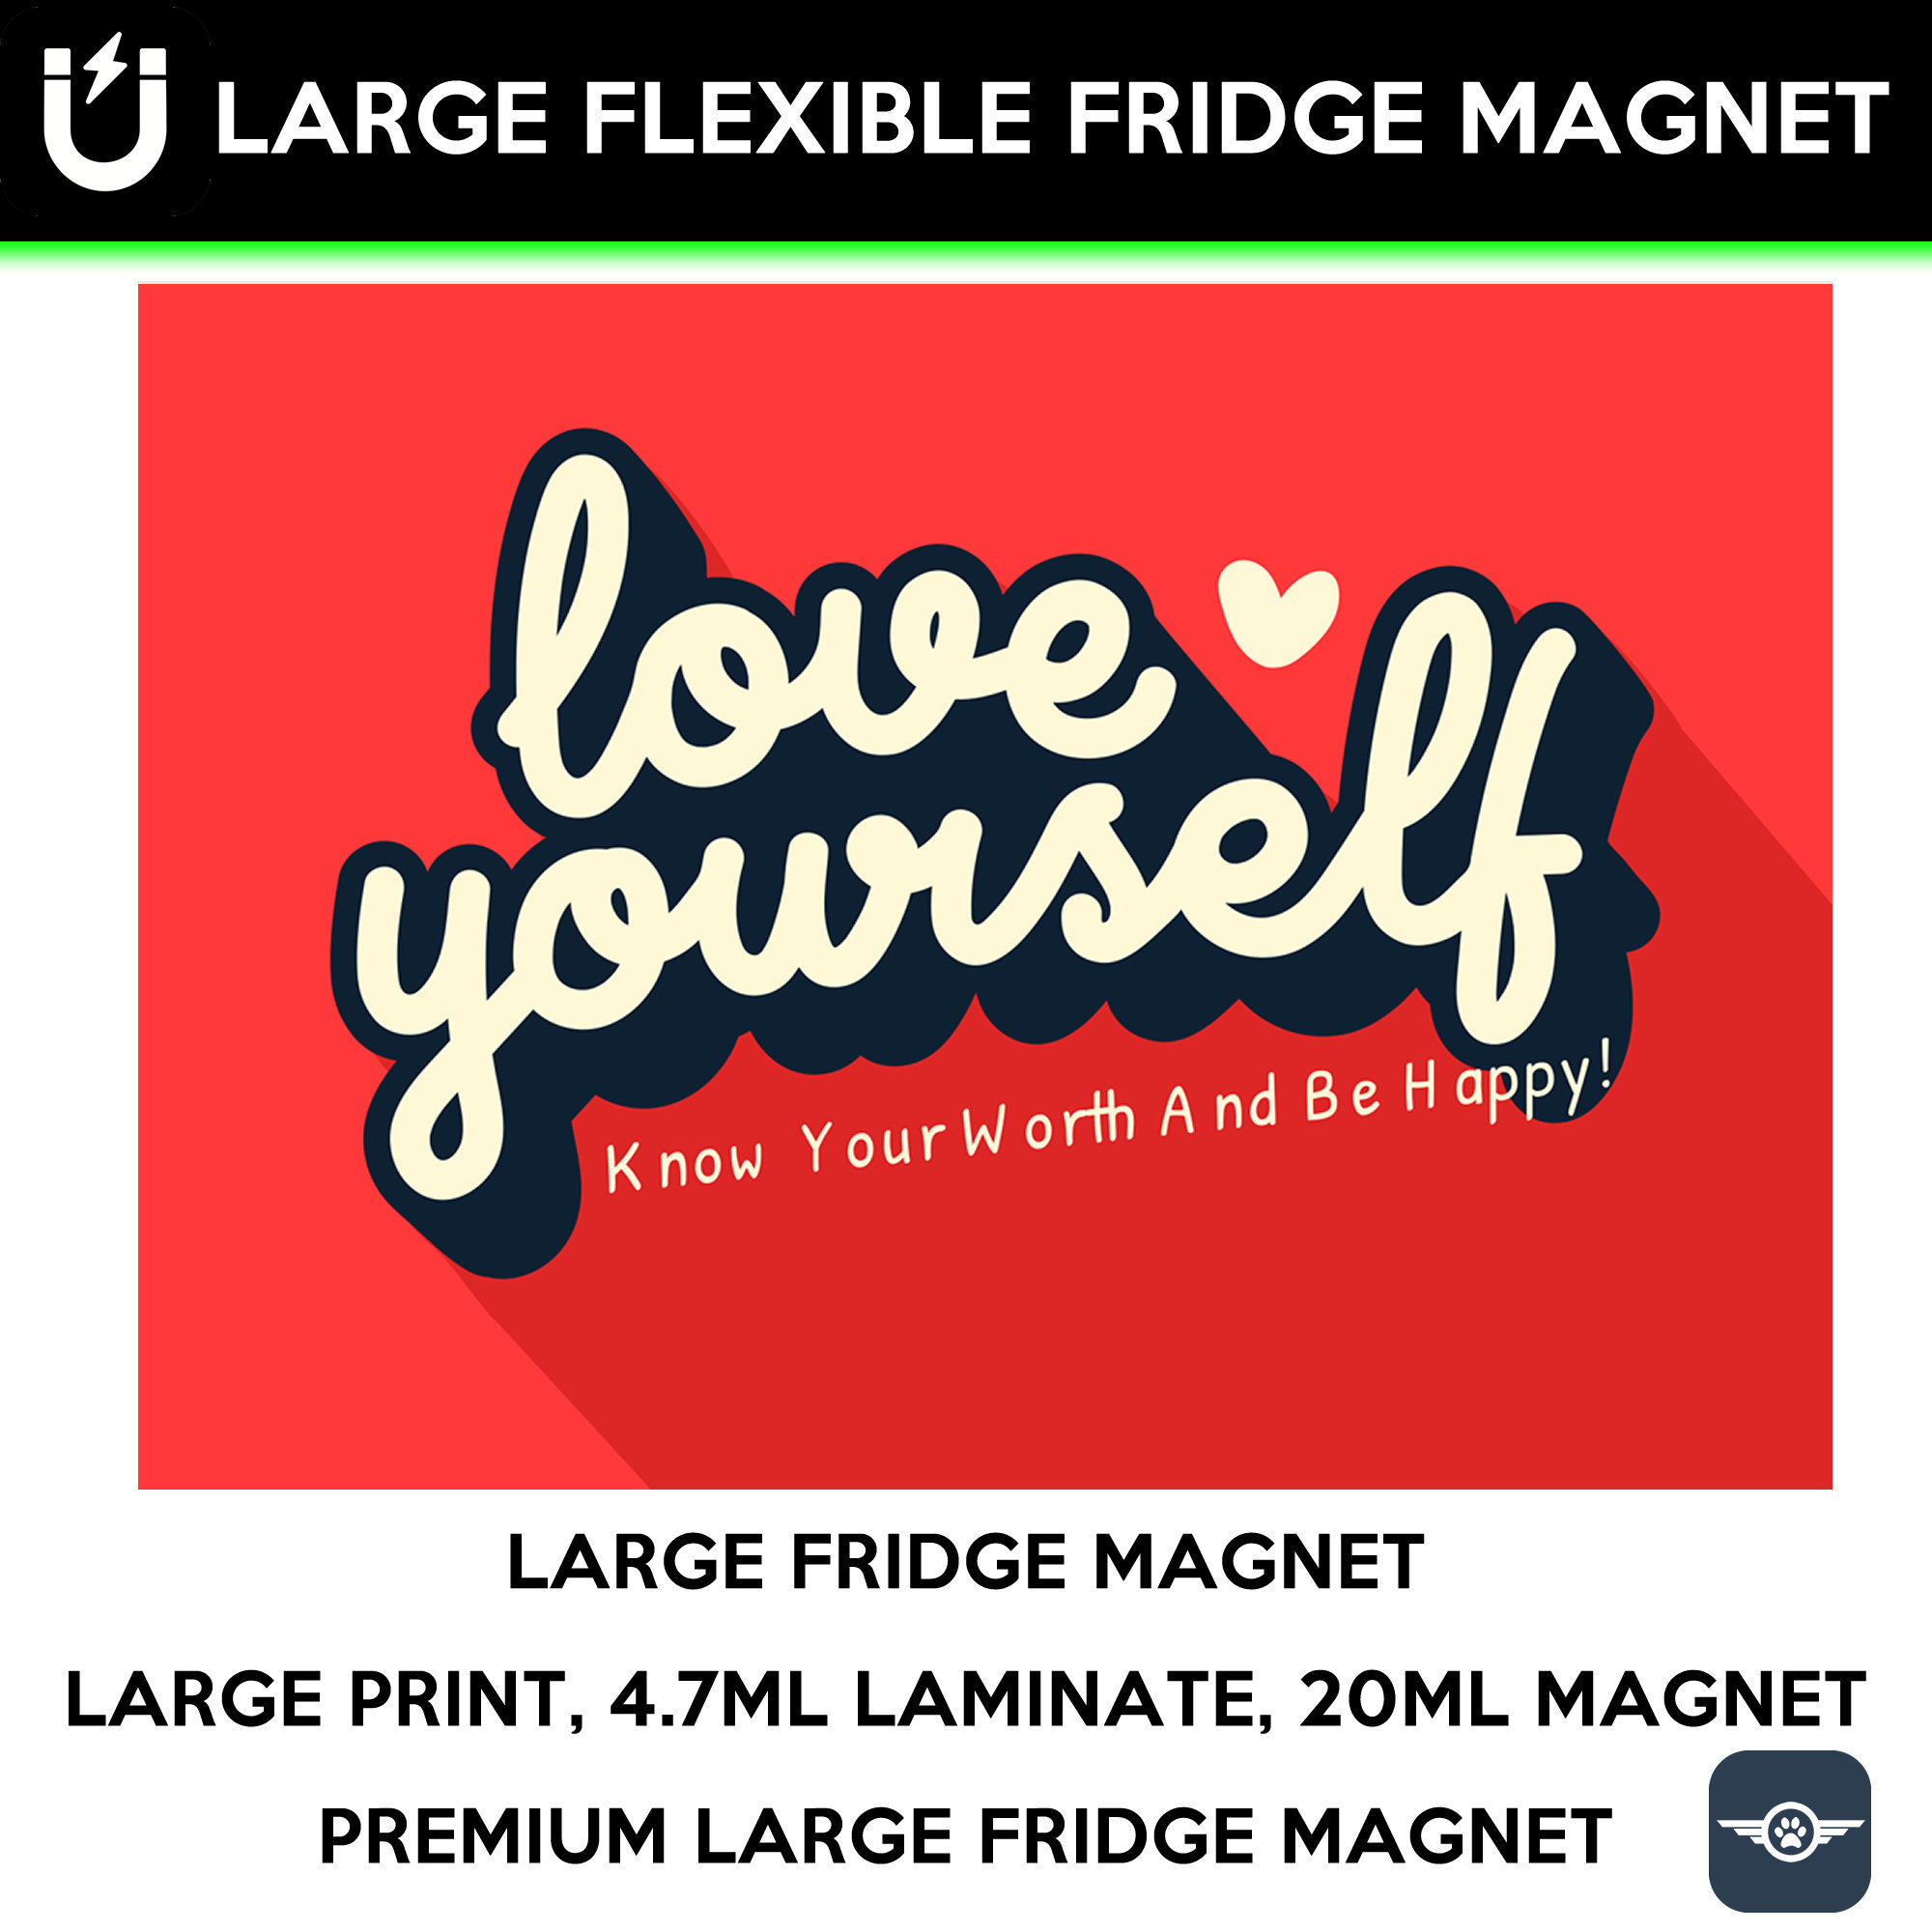 Love yourself know your worth and be happy inspirational fridge magnet 6.5 inch x 9 inch motivational premium large magnet